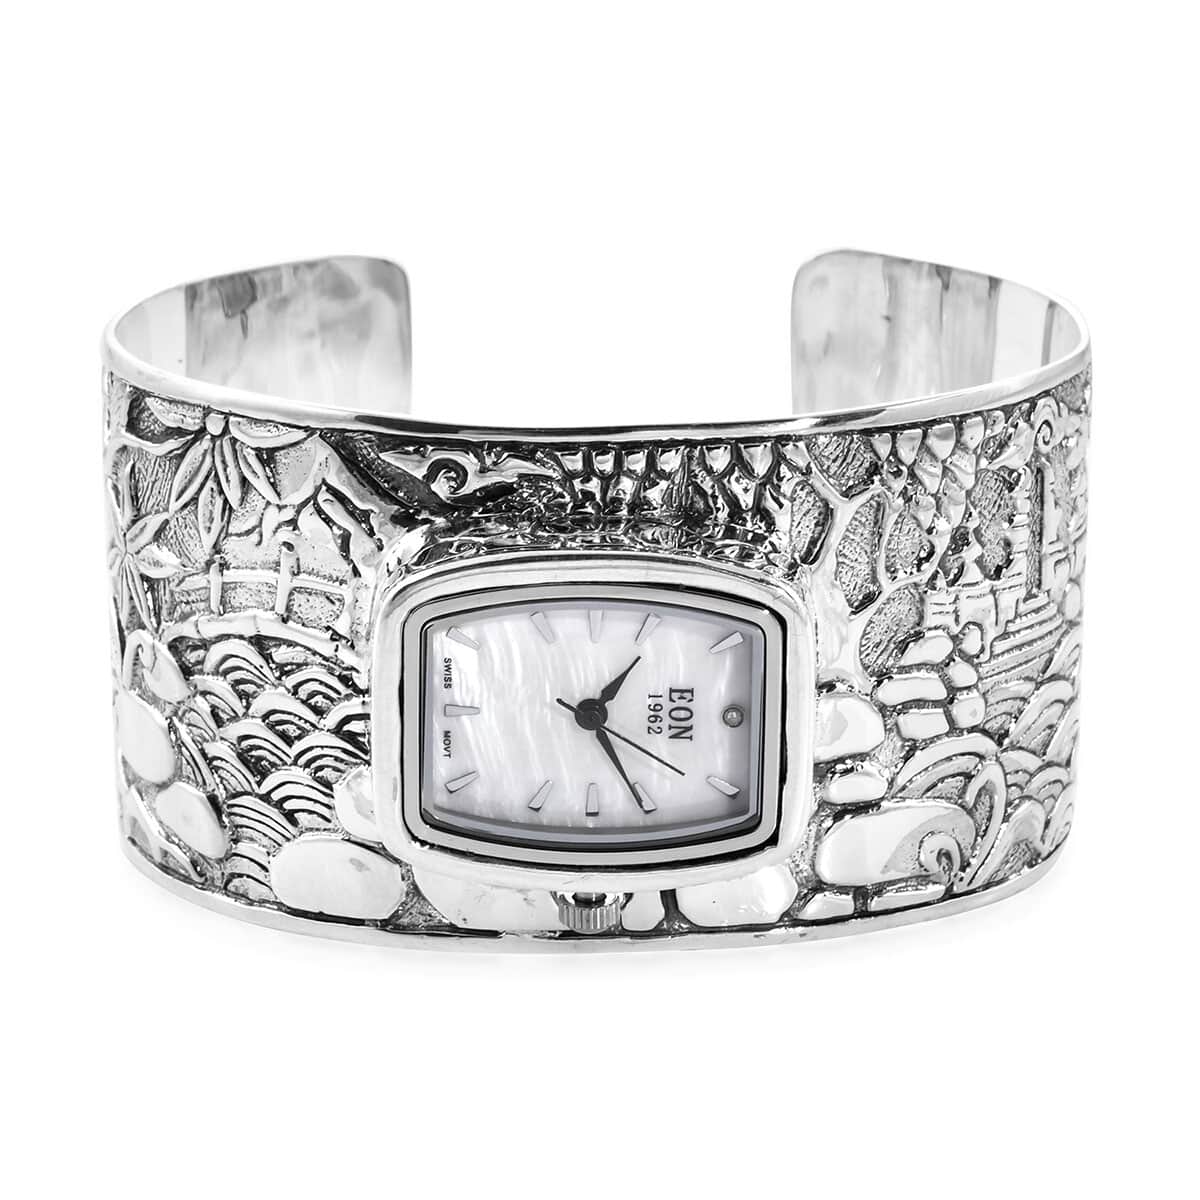 BALI LEGACY EON 1962 Swiss Movement Cuff Bracelet Watch in Sterling Silver with Stainless Steel Back , Designer Bracelet Watch , Analog Luxury Wristwatch image number 3